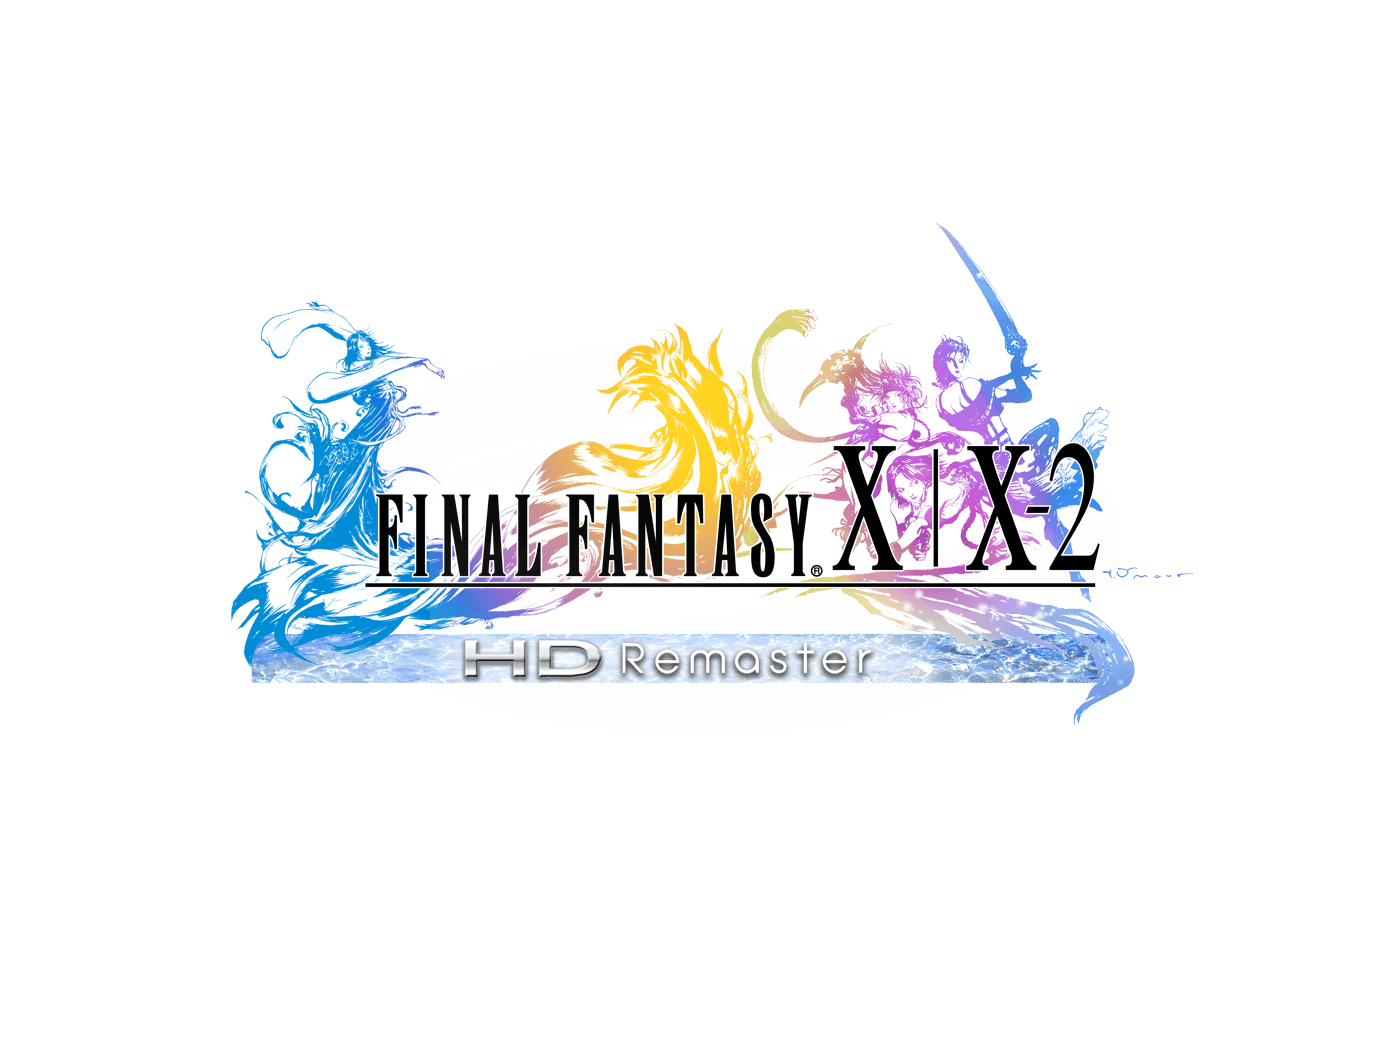 download final fantasy x hd ps4 for free